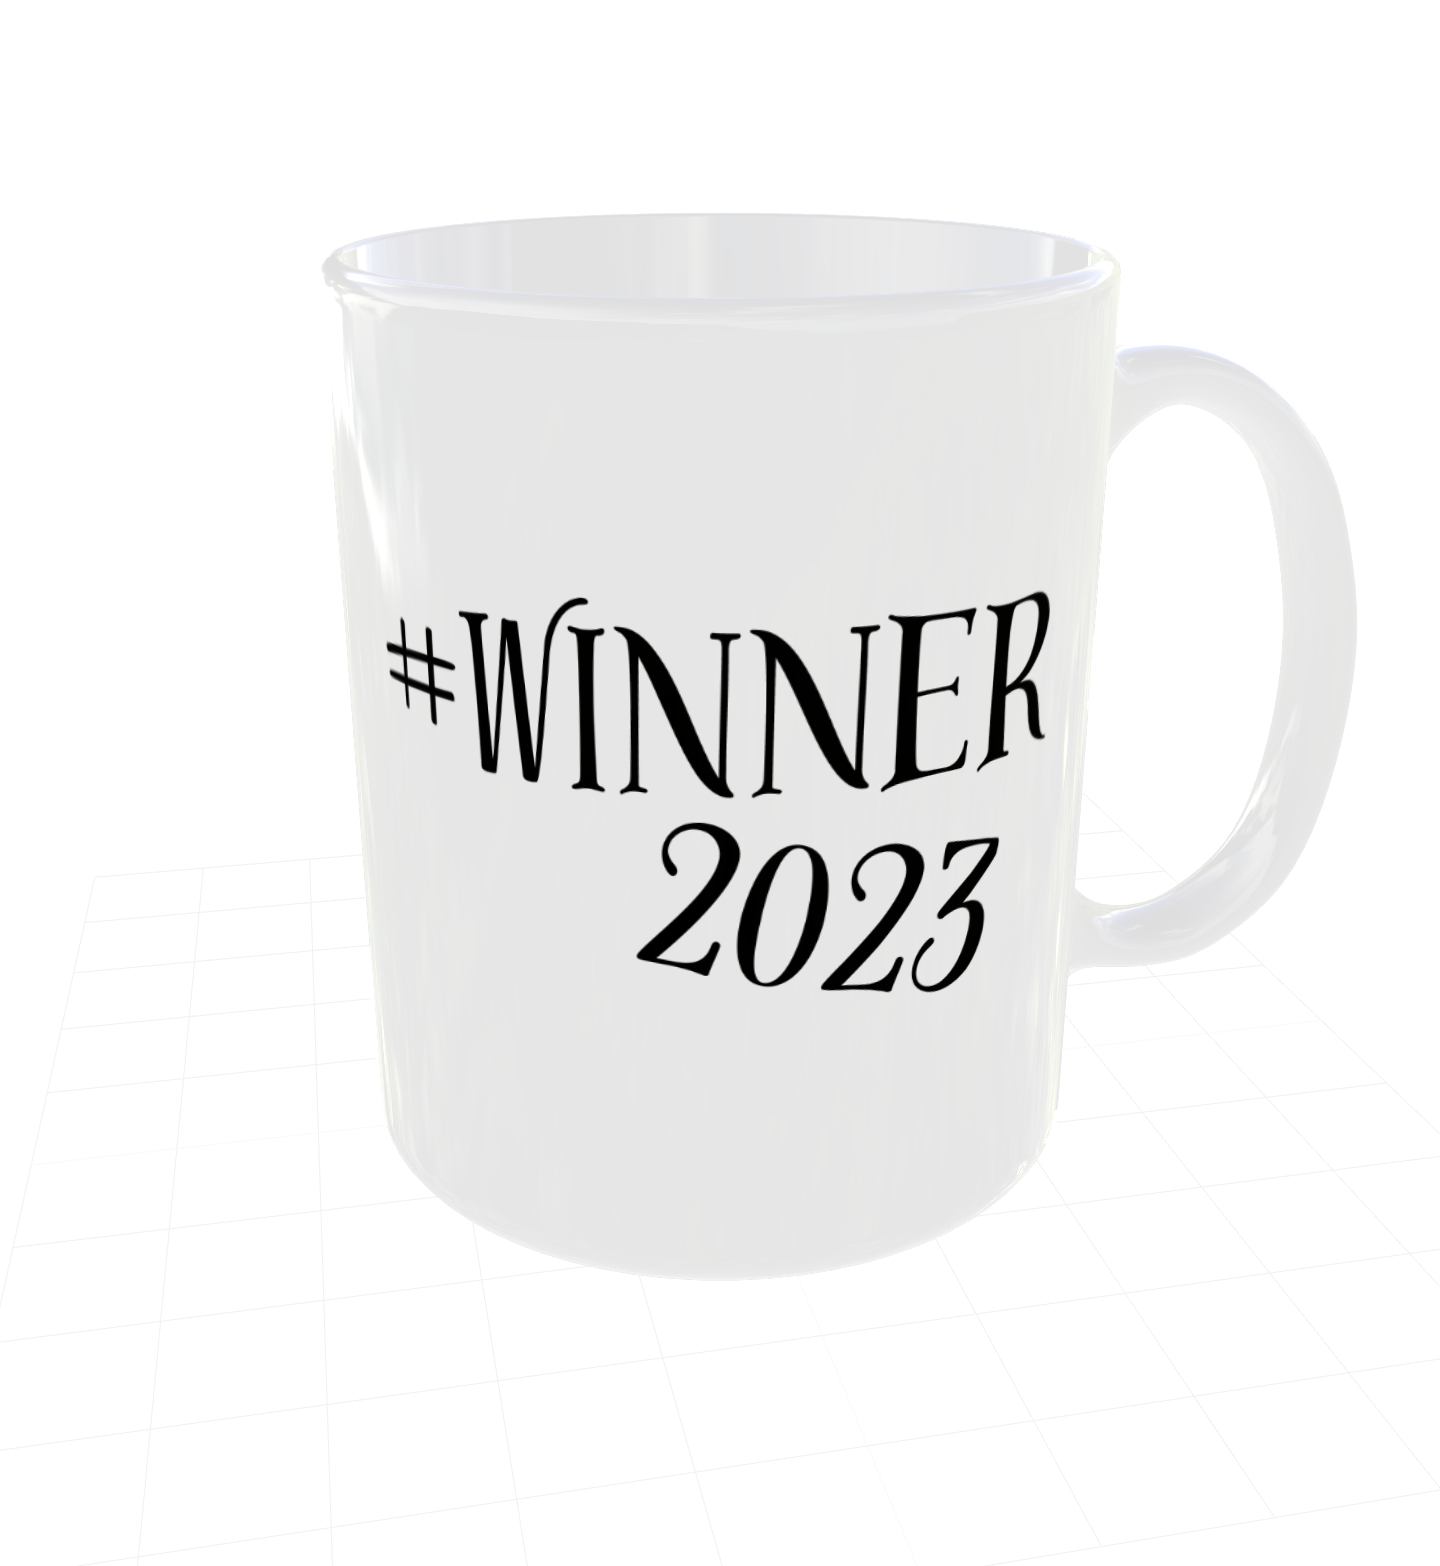 Unique gift boxes come alive with a winner 2023 mug for all Melbourne grand final die hards!